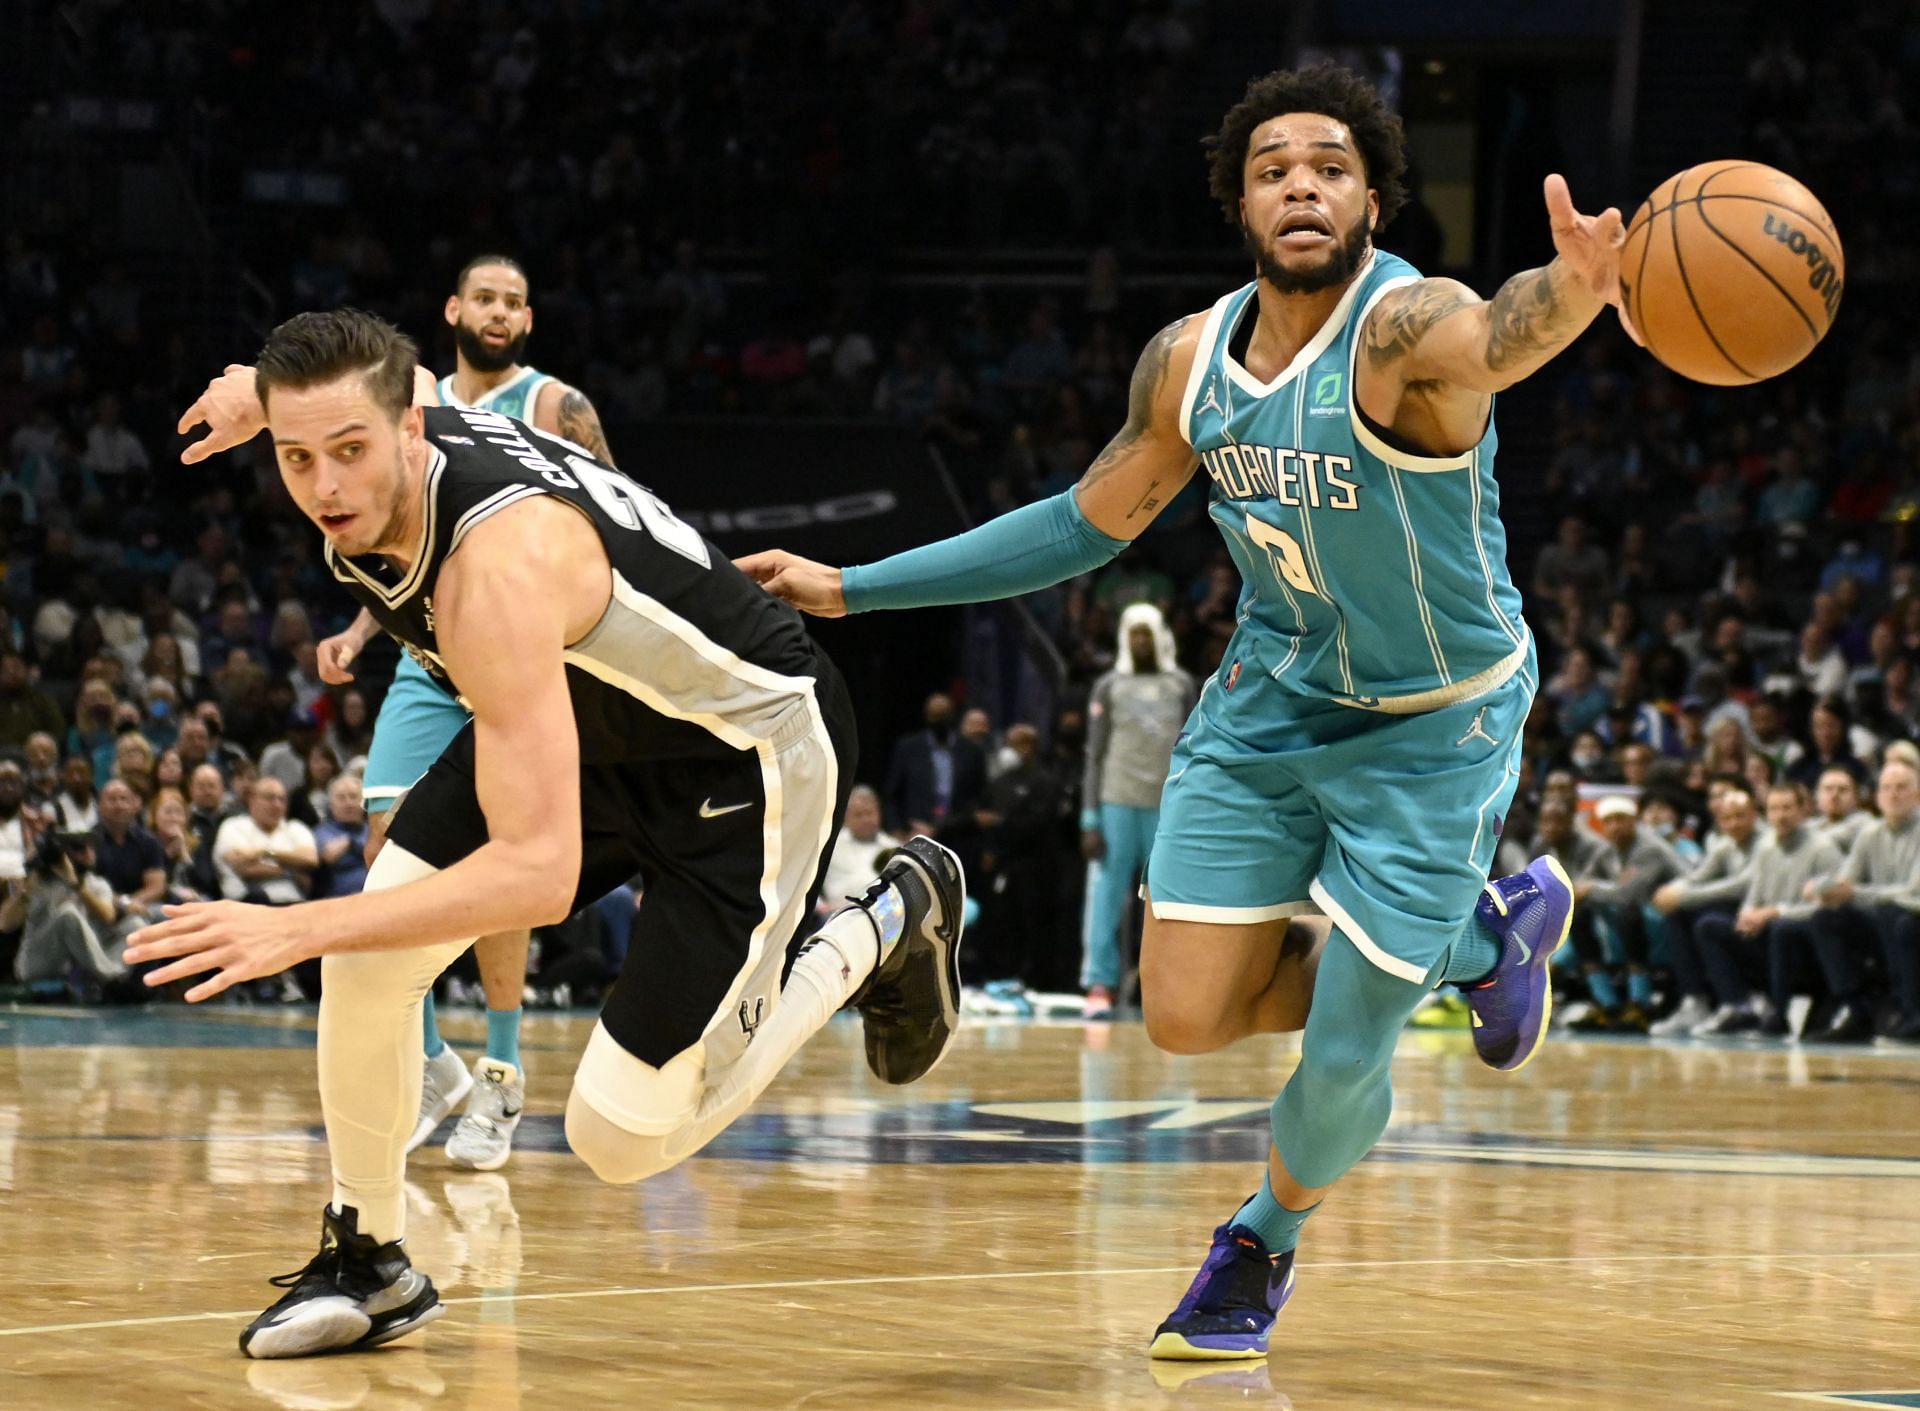 Miles Bridges of the Charlotte Hornets reaches for the ball after it was knocked out of his grip by Zach Collins of the San Antonio Spurs on March 5 in Charlotte, North Carolina.